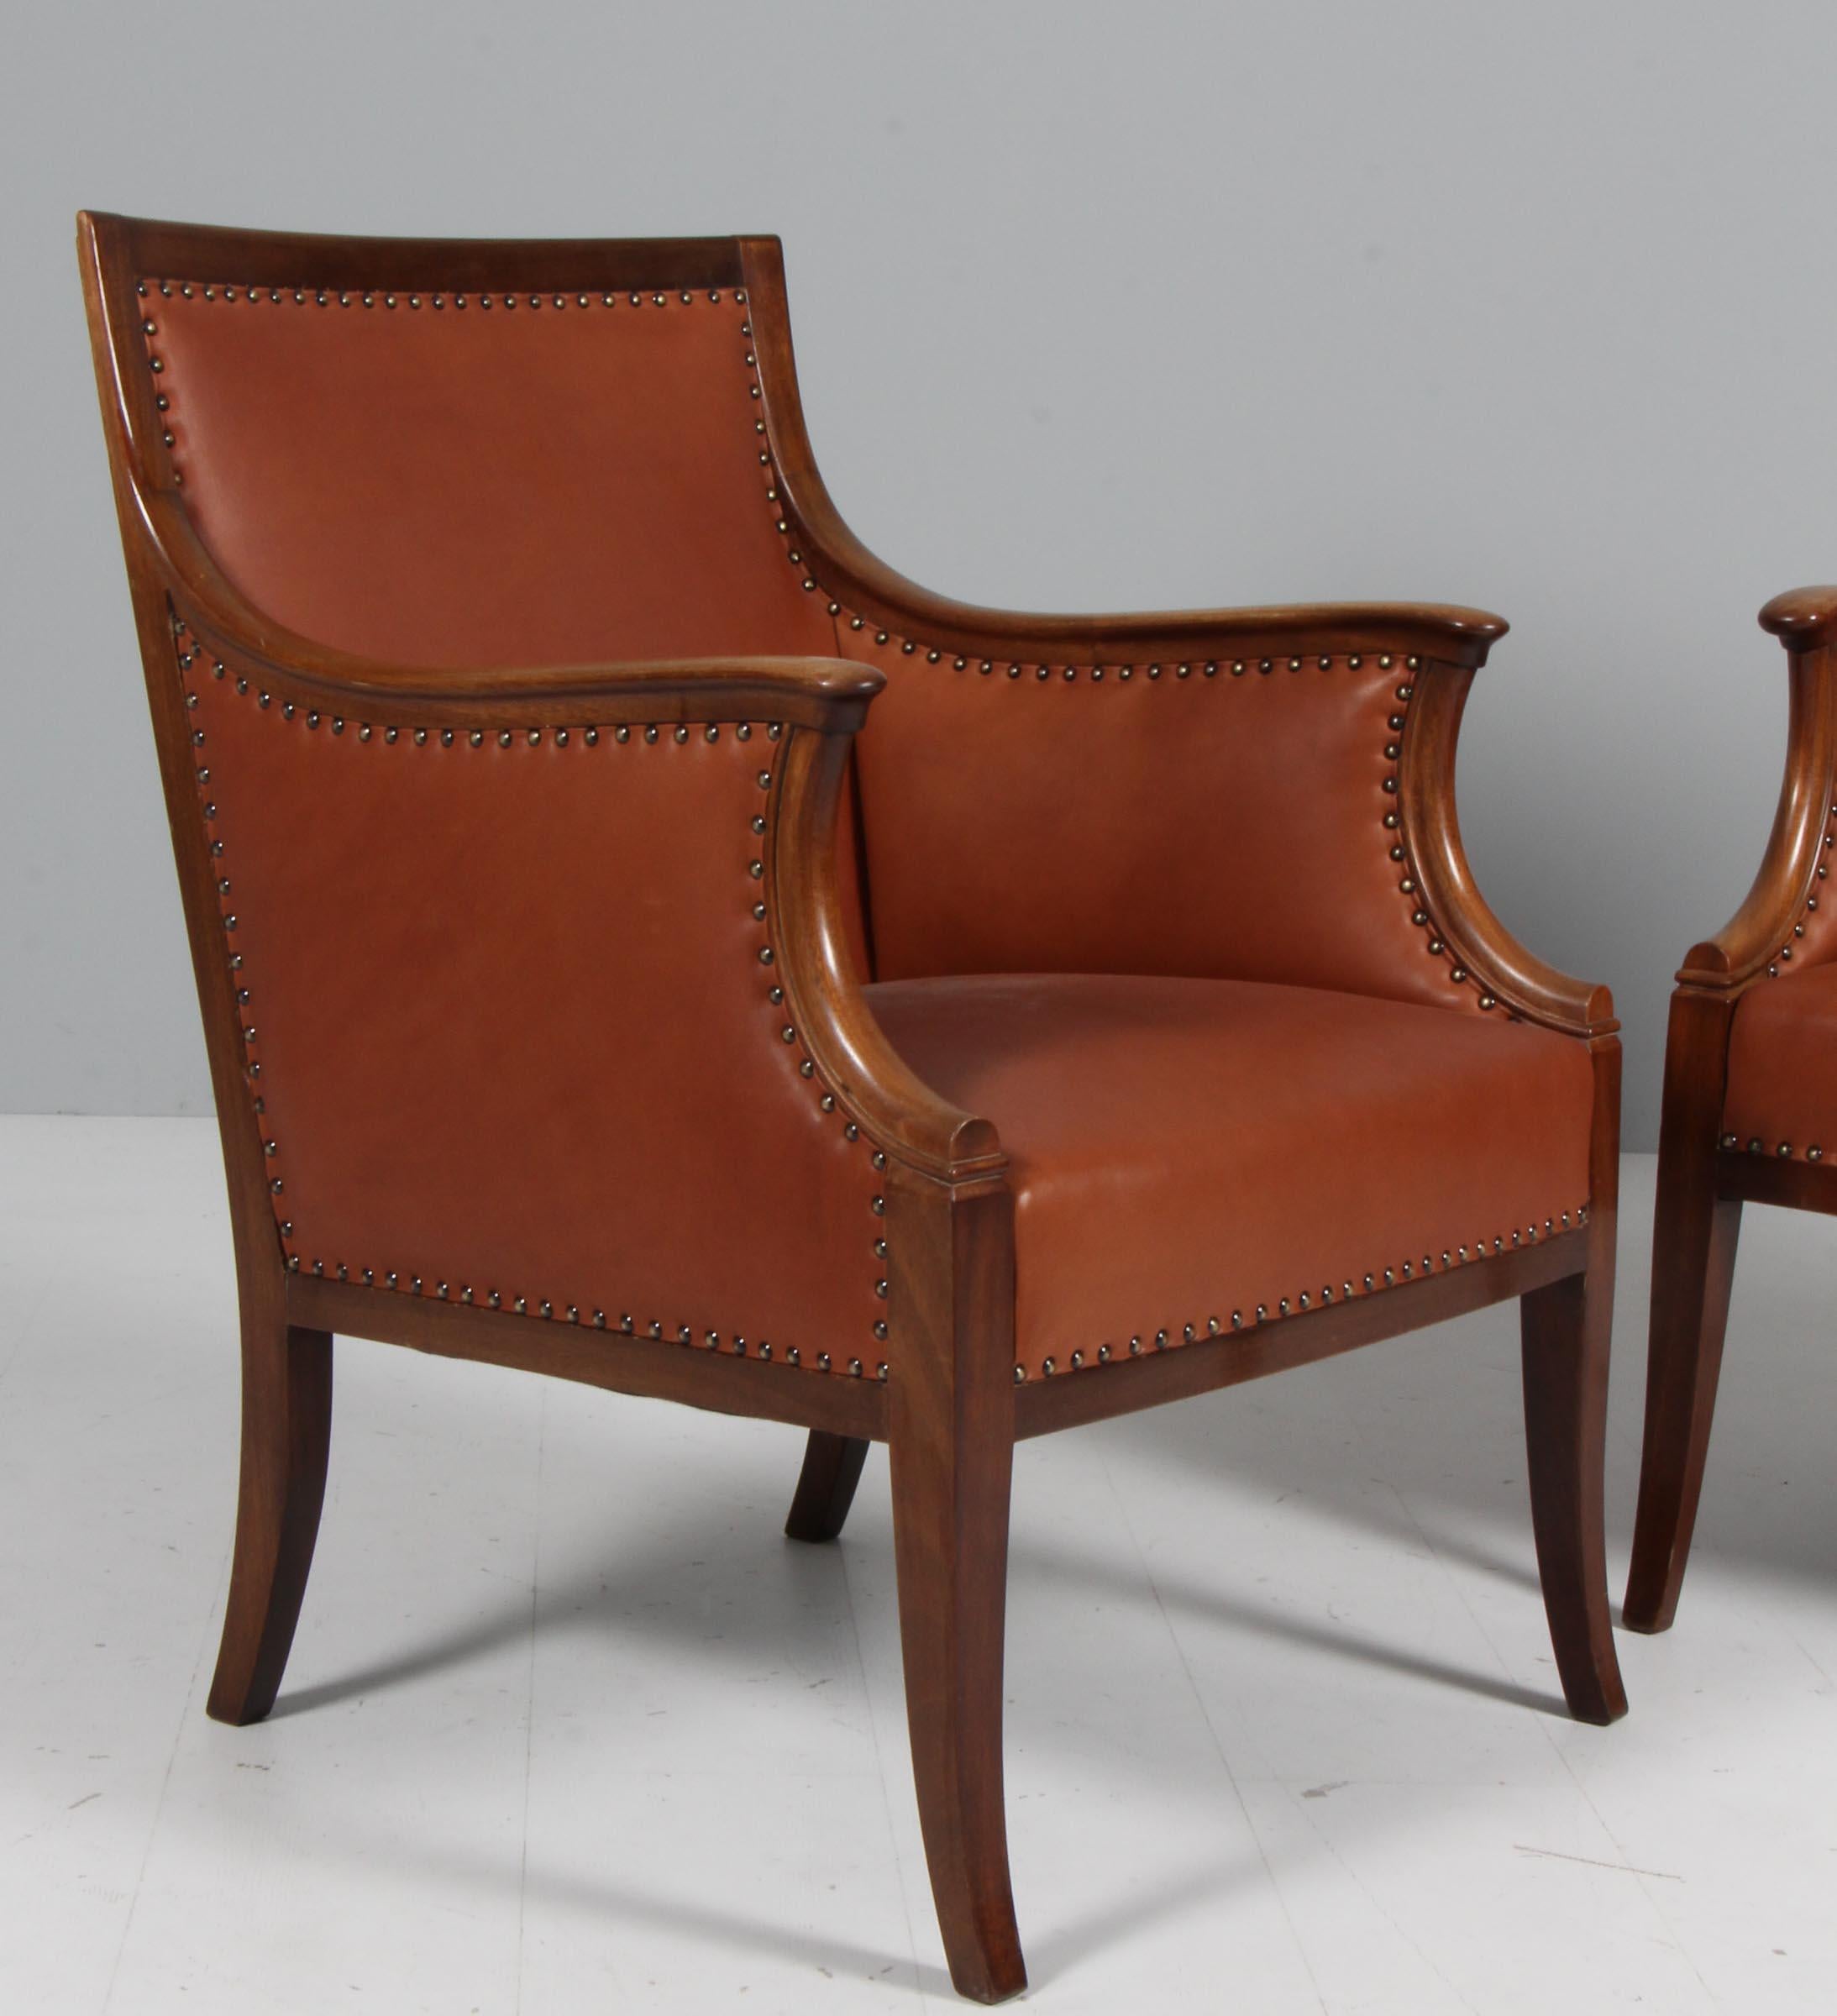 Frits Henningsen, Pair of Lounge Chairs with Brandy Aniline Leather In Excellent Condition For Sale In Esbjerg, DK